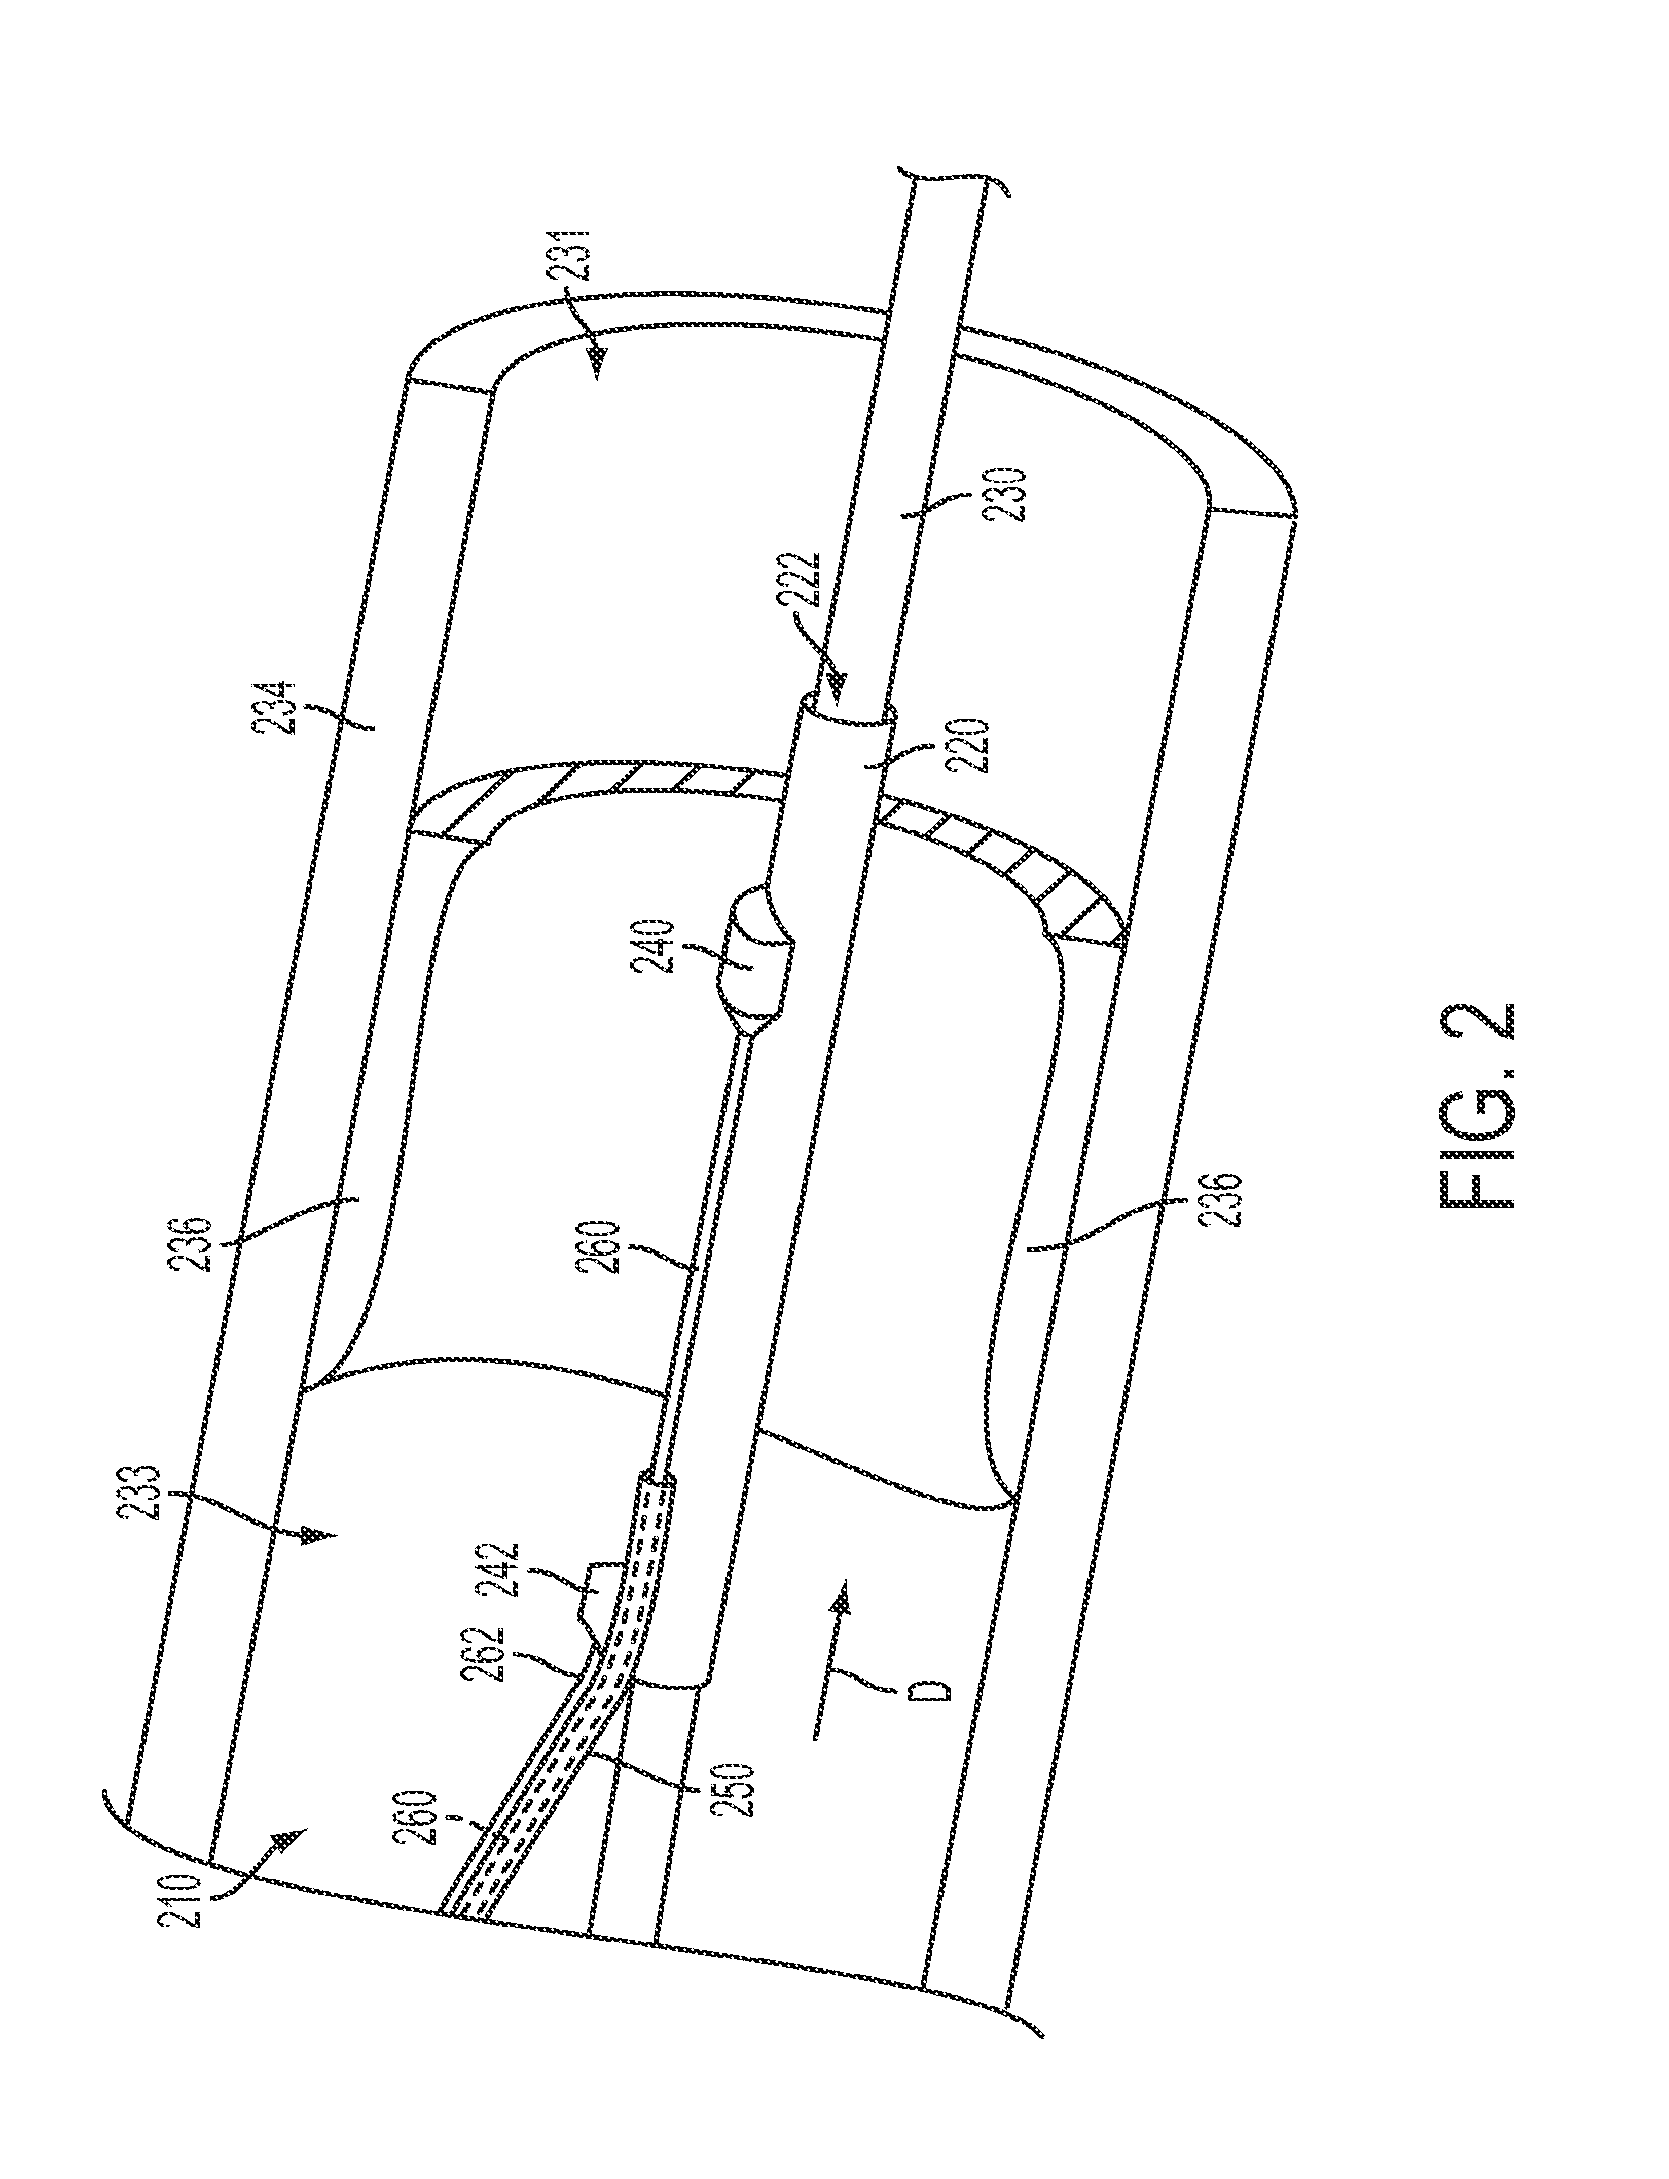 Physiological sensor delivery device and method